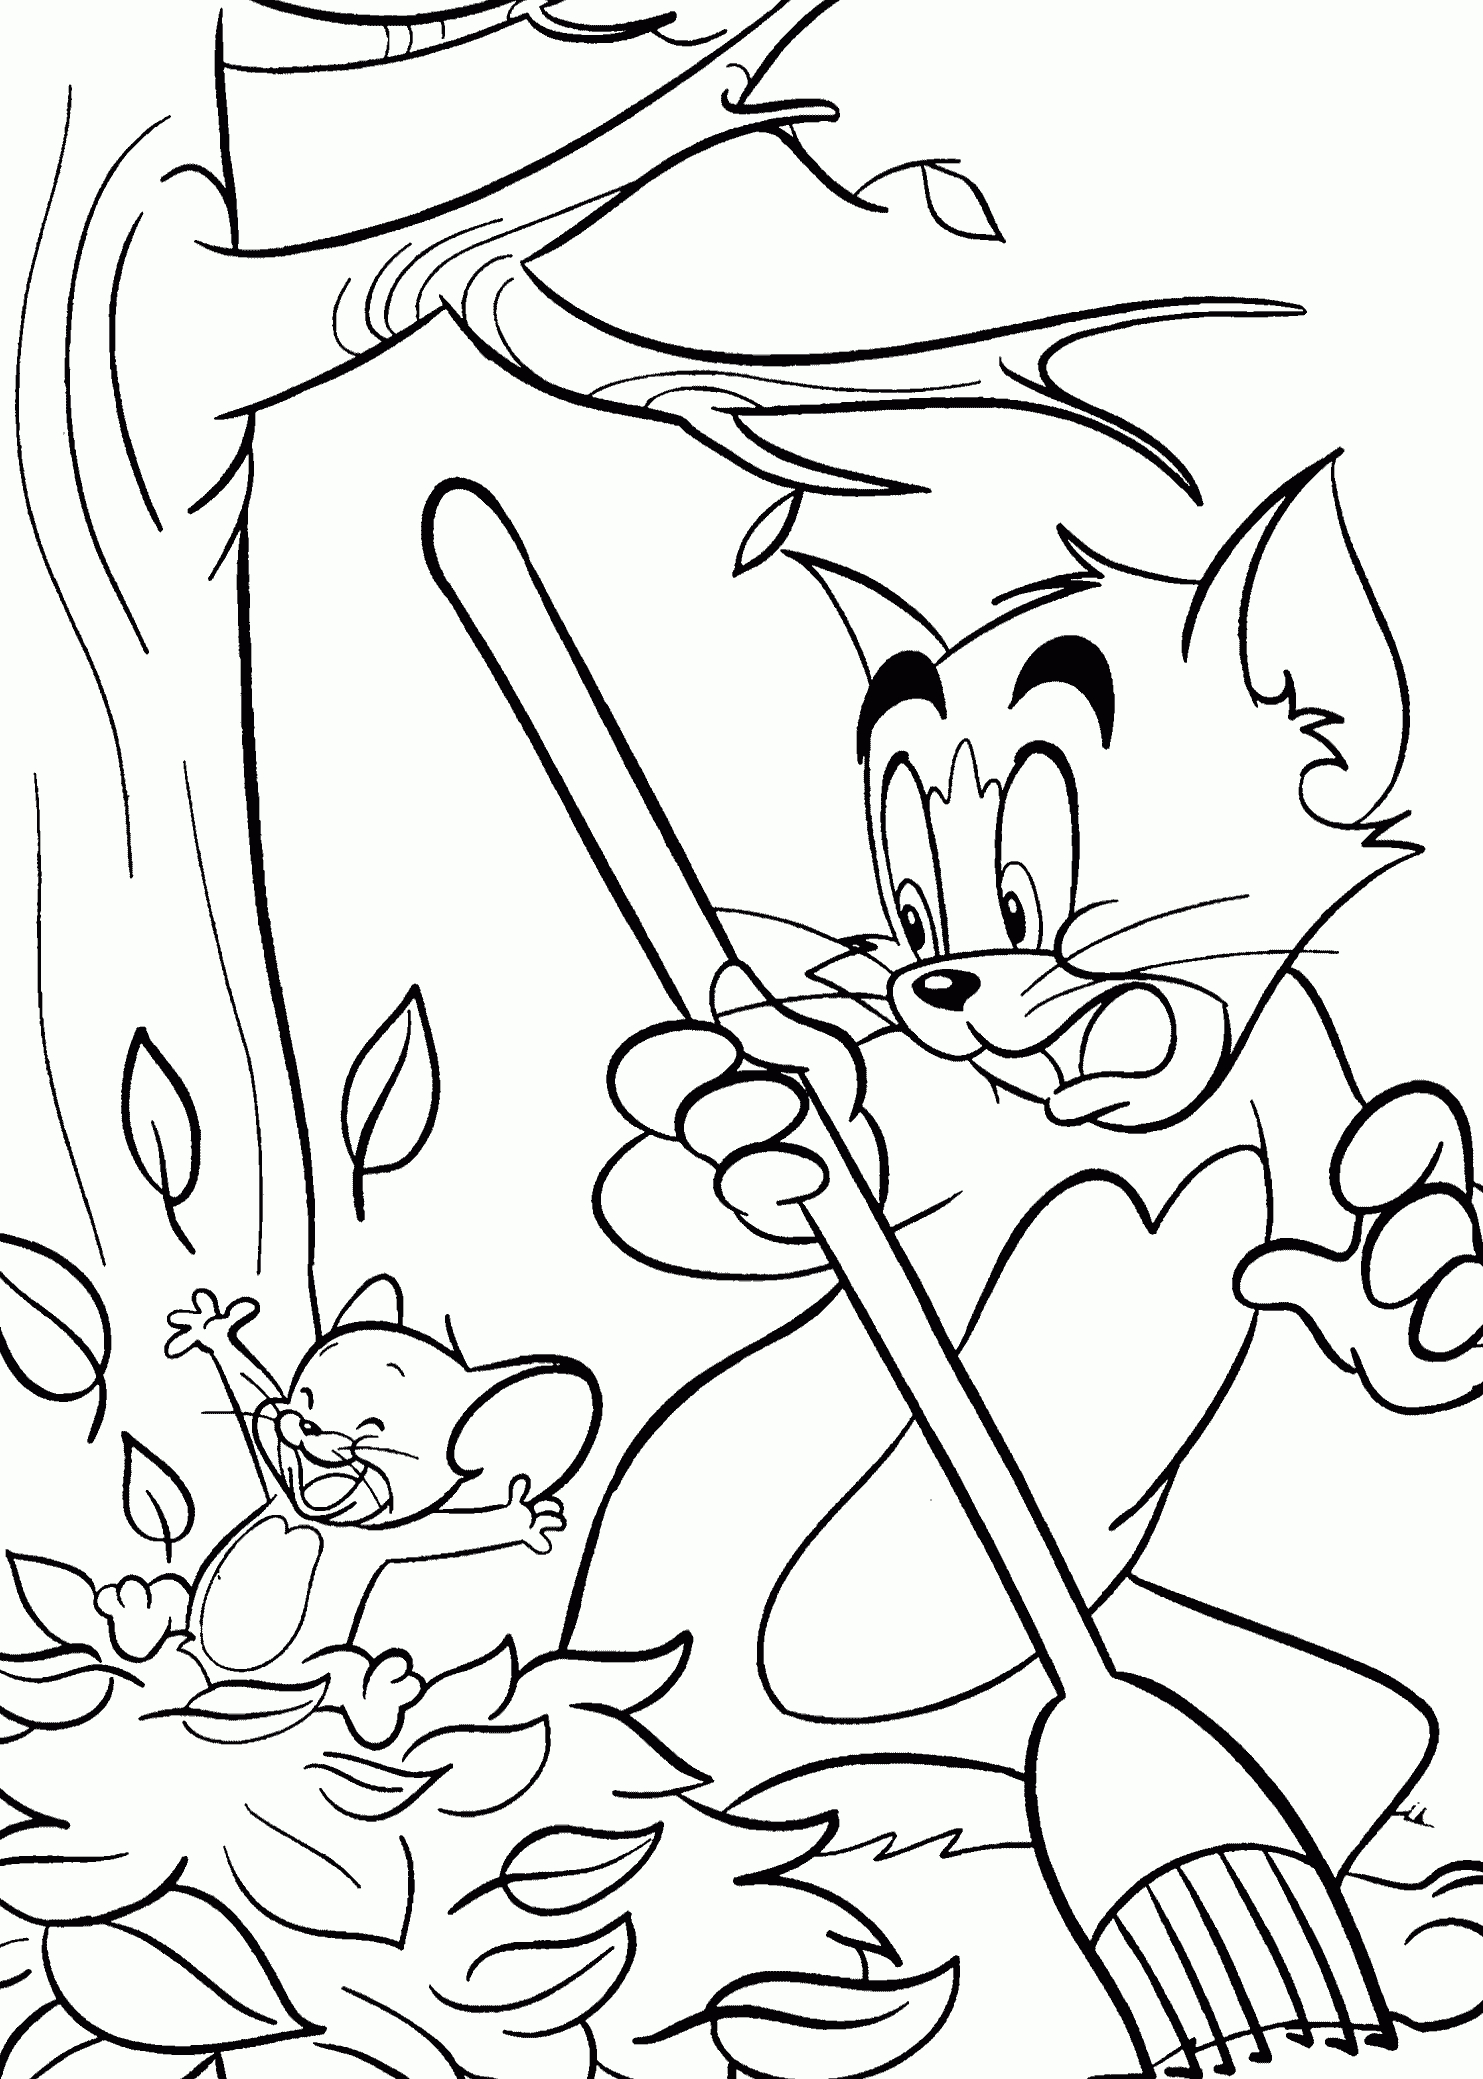 Tom And Jerry Fall Coloring Pages For Kids, Printable Free | Fall - Free Printable Tom And Jerry Coloring Pages